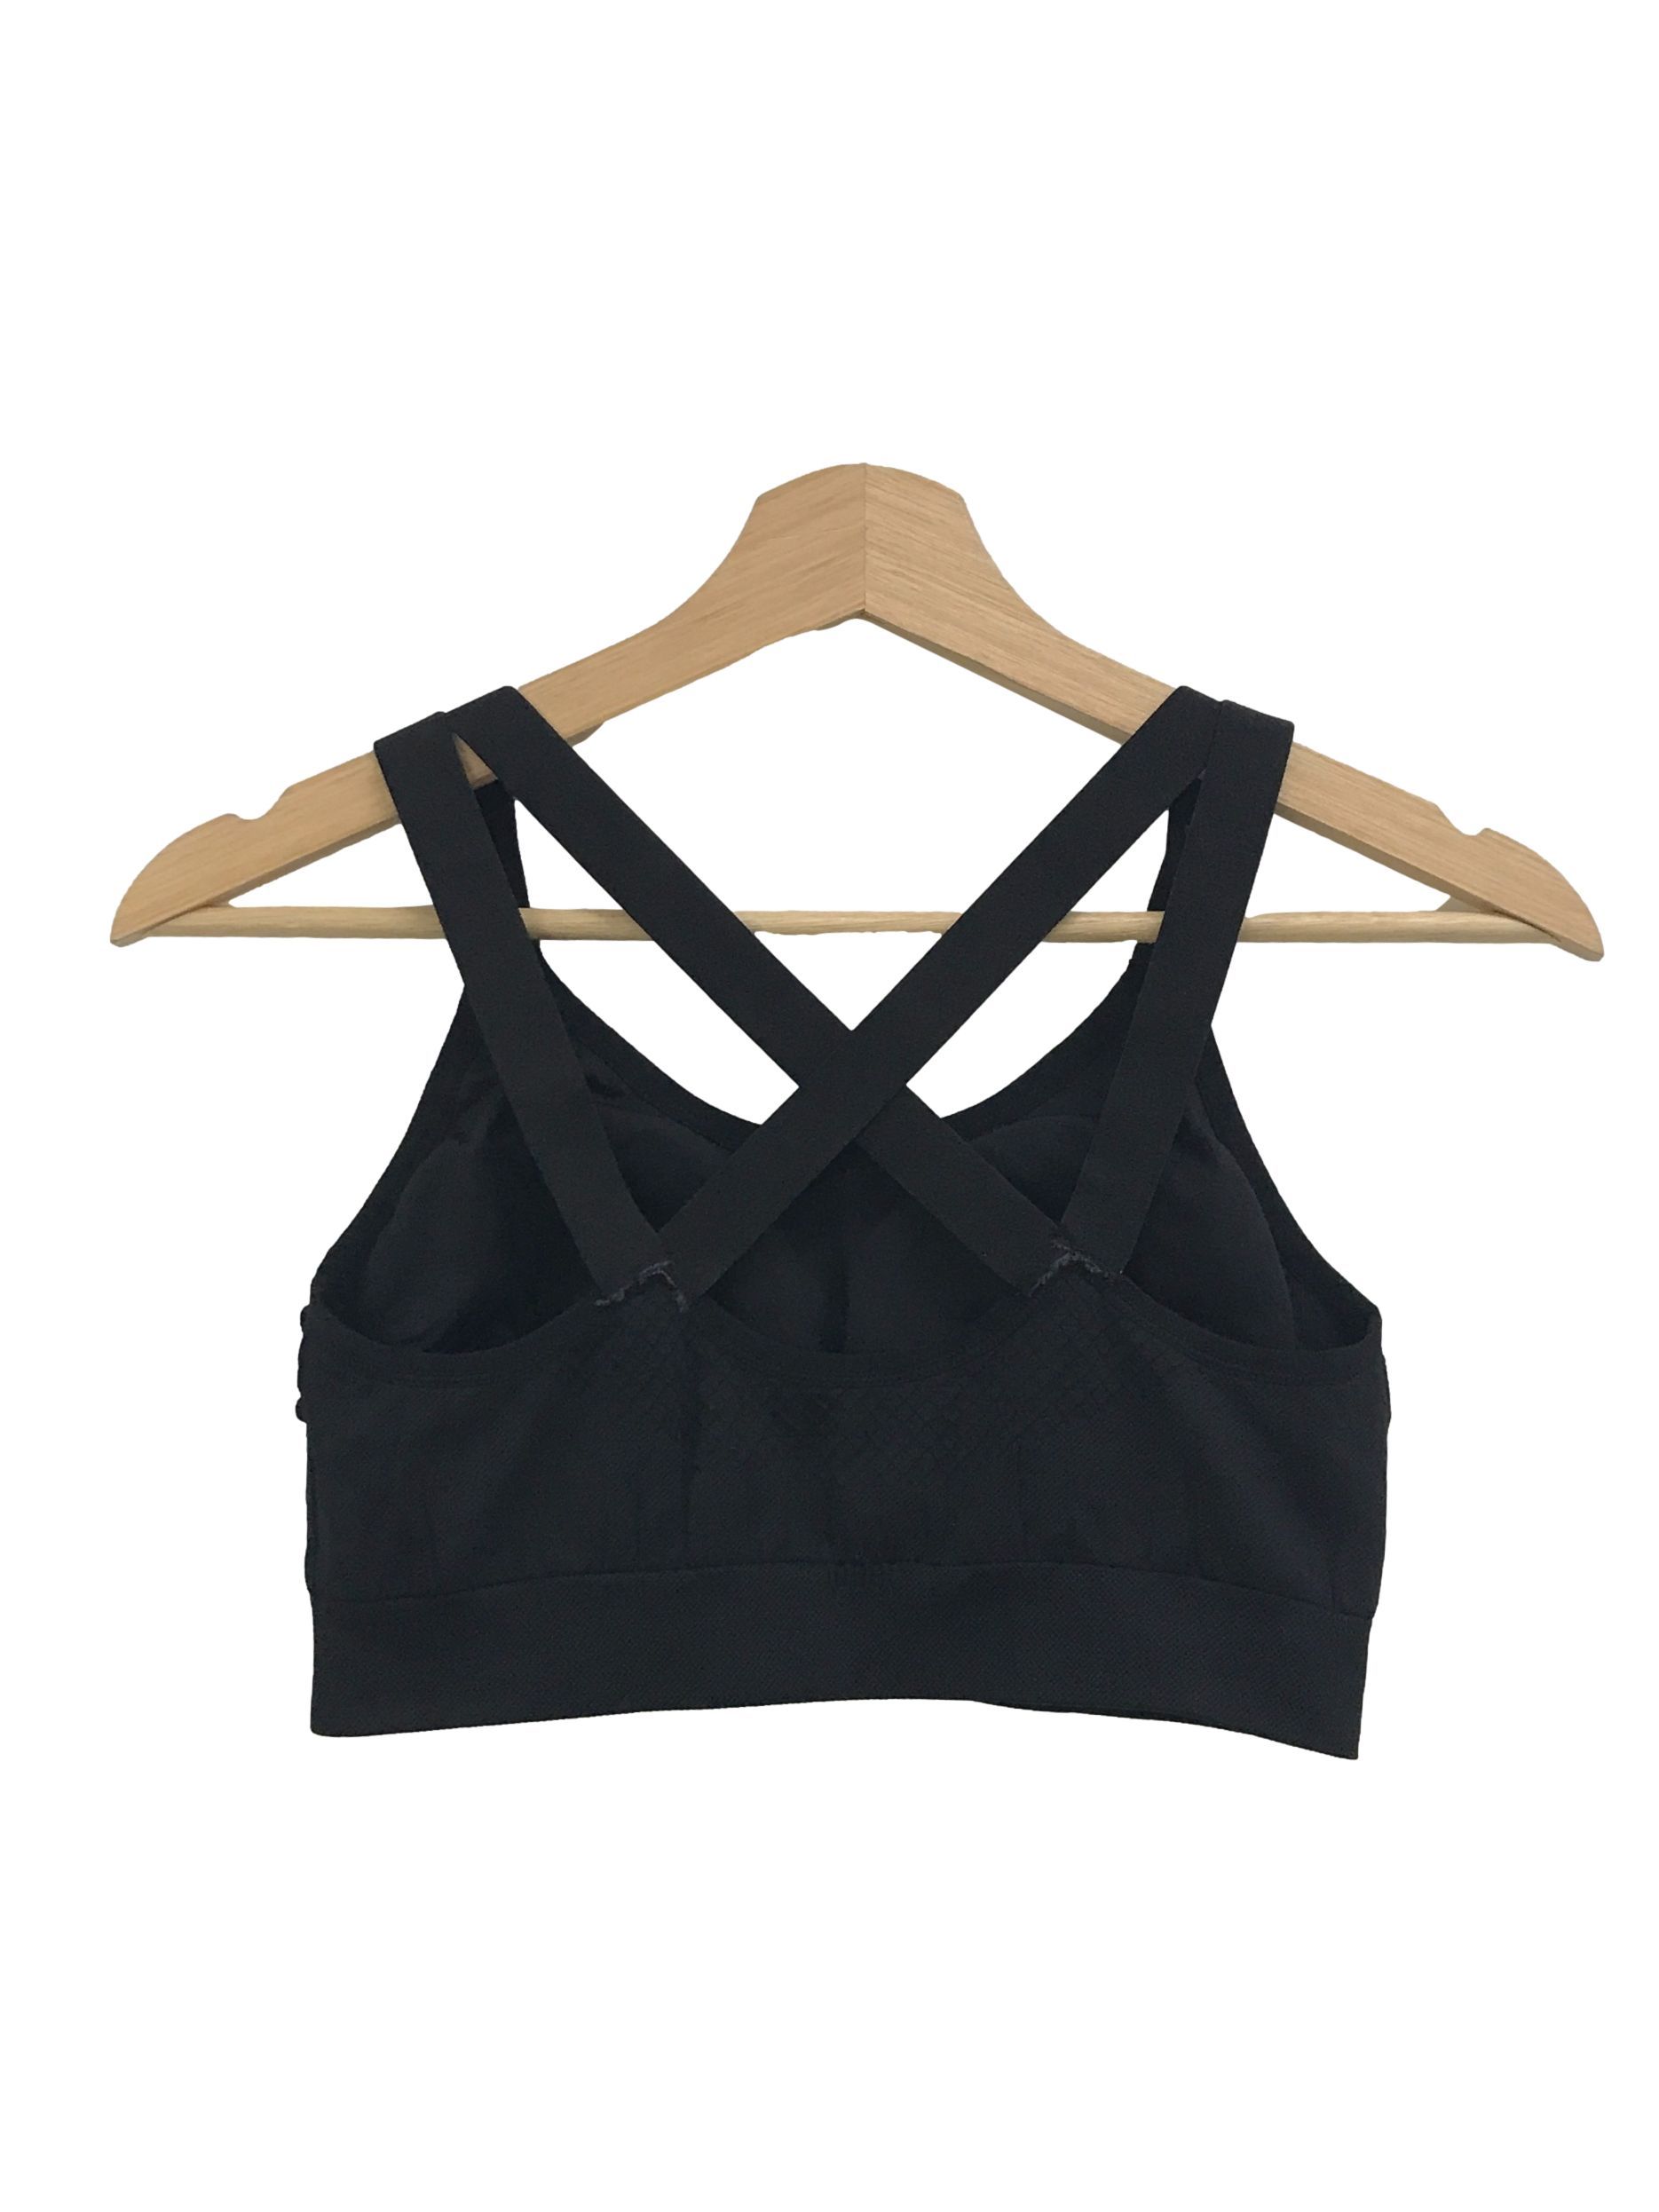 Assorted Brands Neon Green Sports Bra Tops, Women's Fashion, Activewear on  Carousell